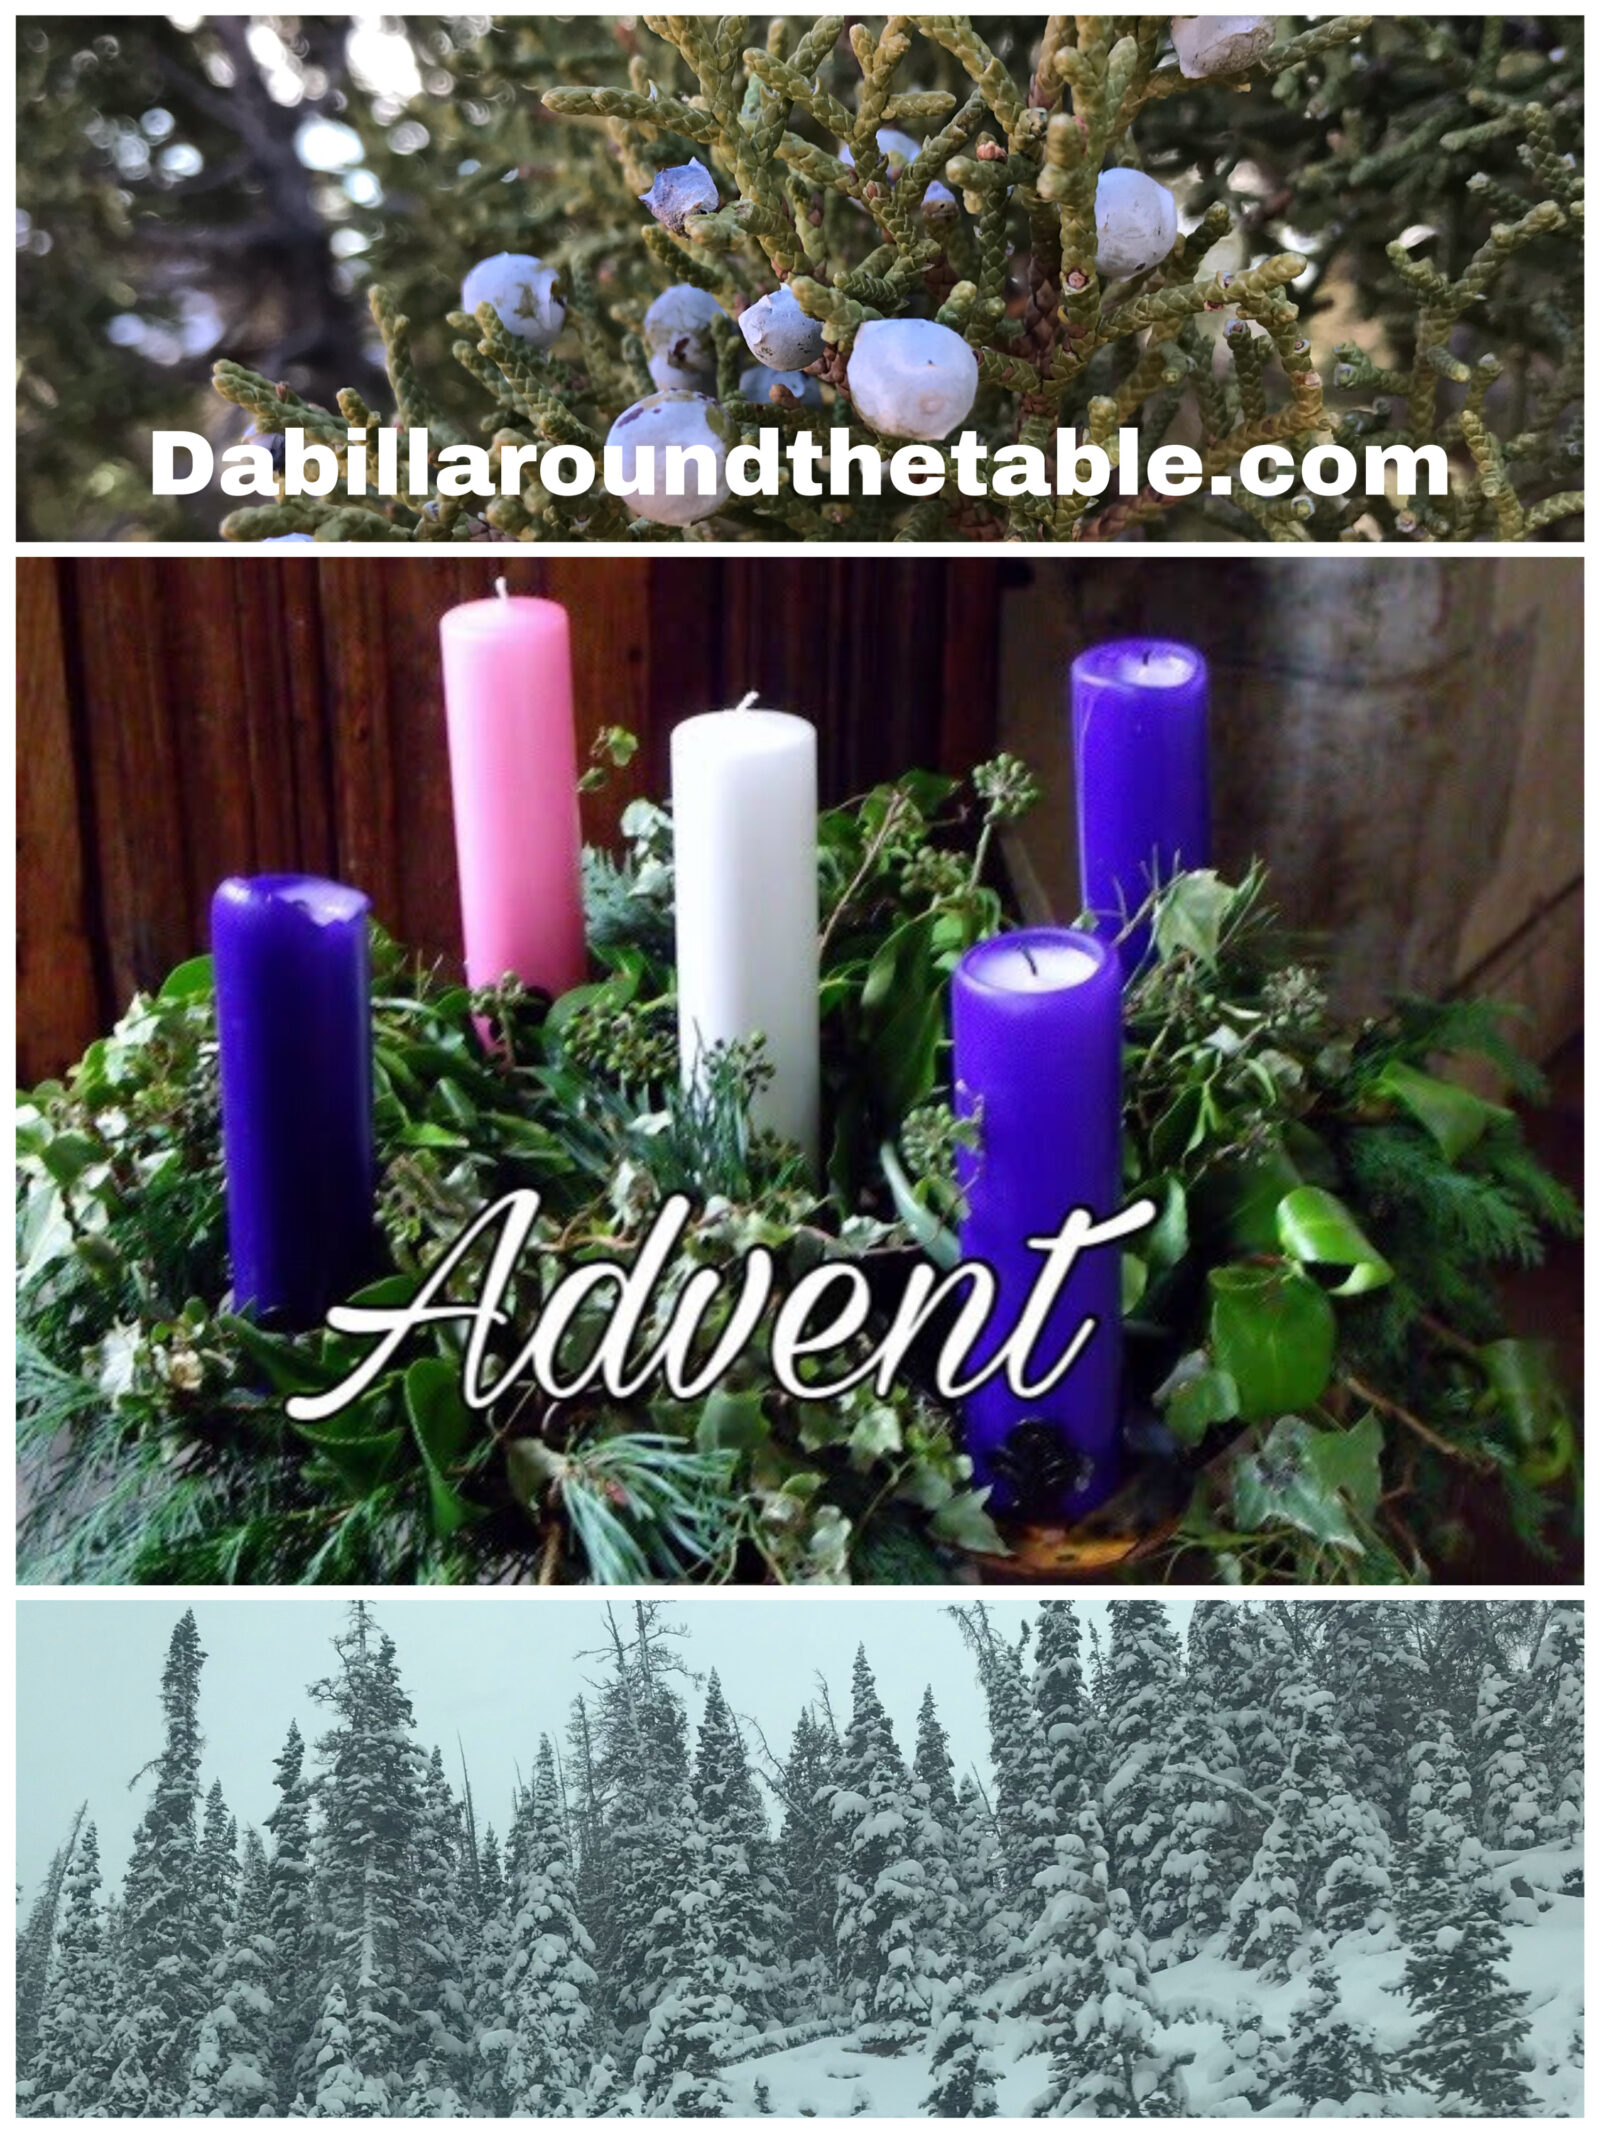 Advent Bible Studies and Books to prepare for Christmas